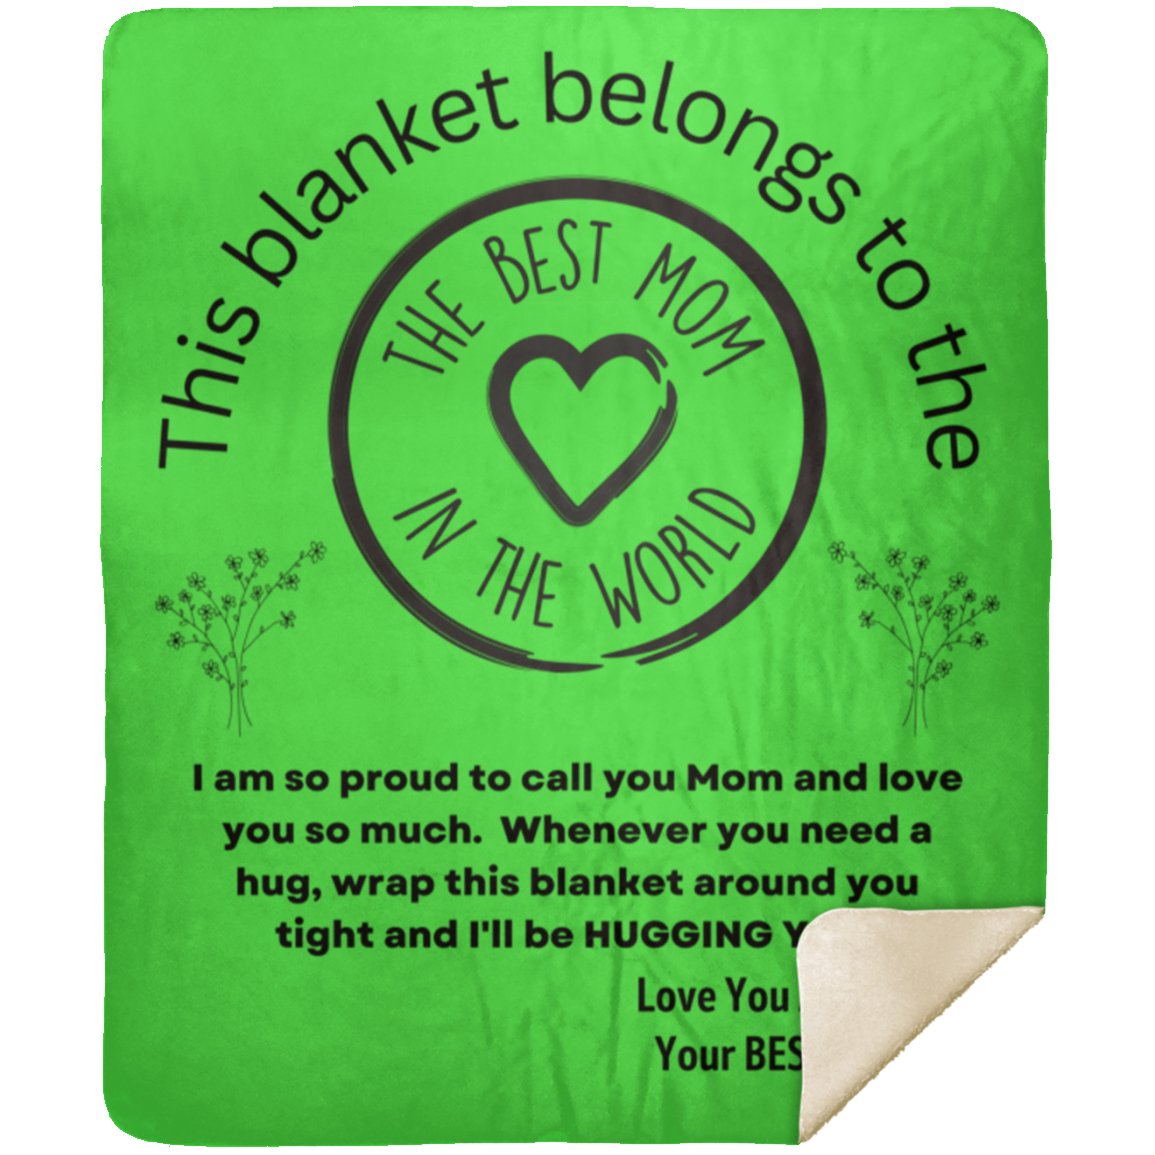 Best Mom in the World Blanket from Son or Daughter